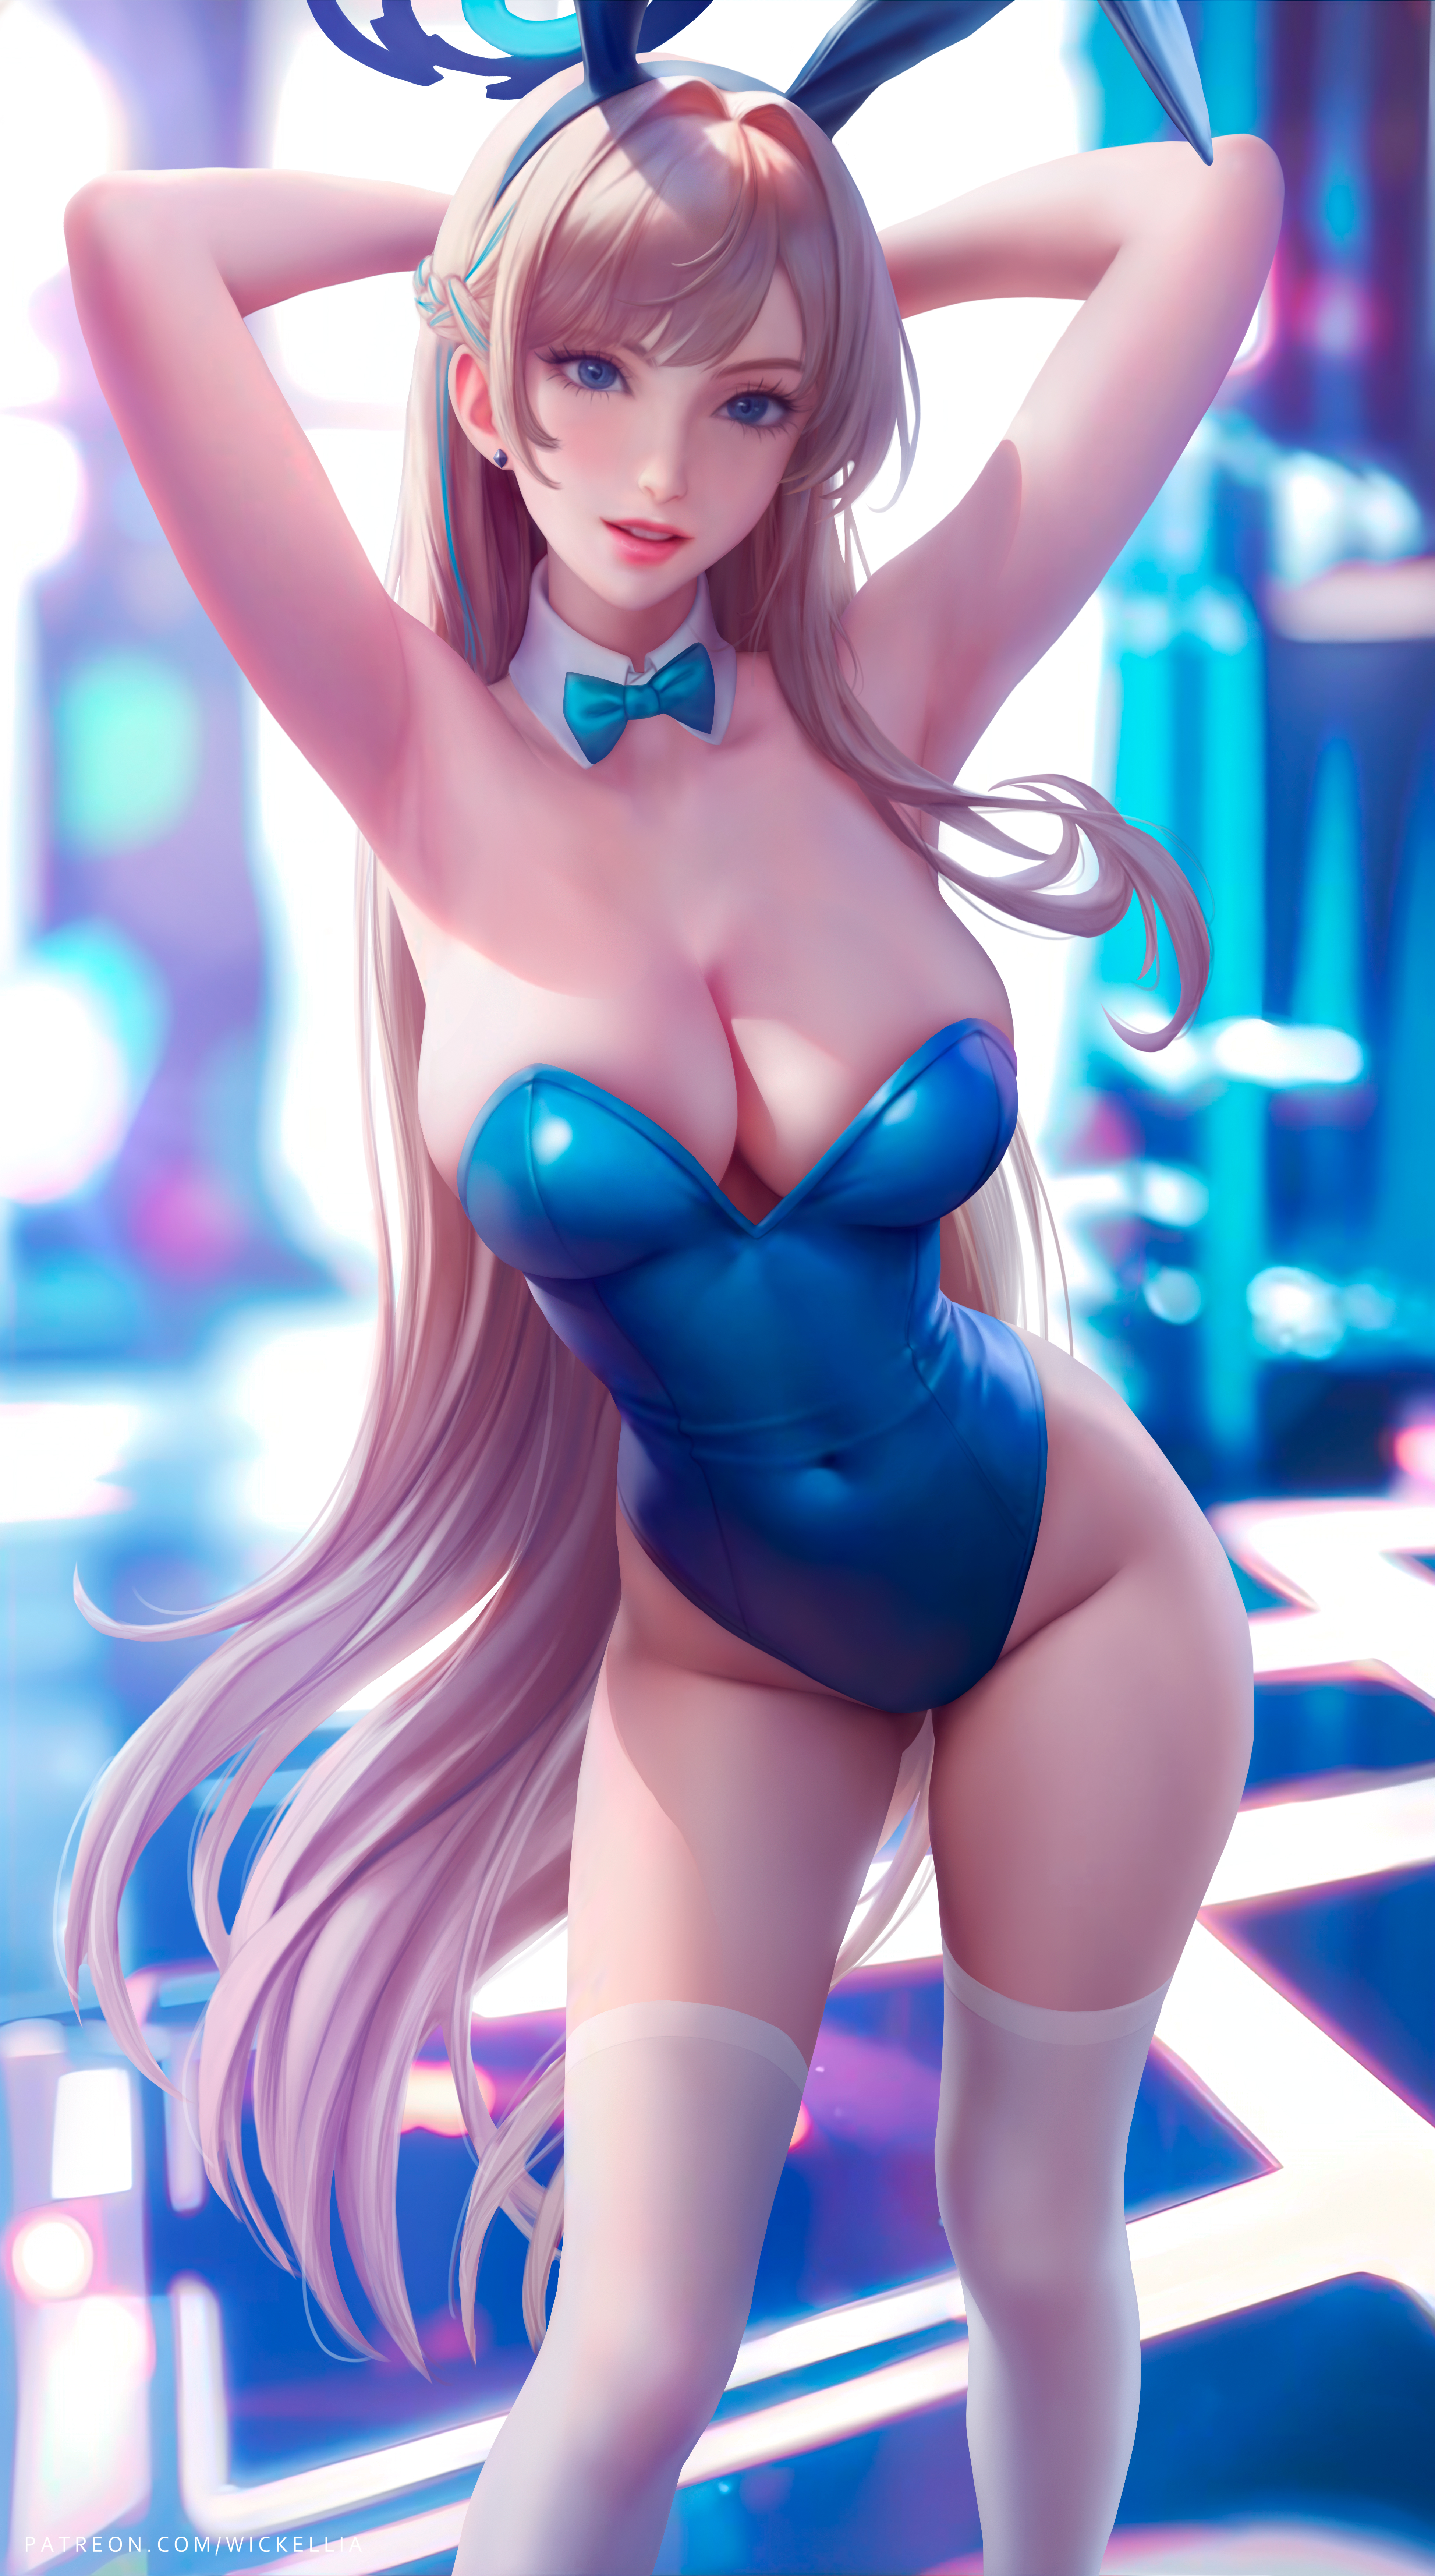 Anime 3900x7000 Asuma Toki (Blue Archive) Blue Archive video games video game girls anime artwork anime girls bunny girl fan art drawing Wickellia arm(s) behind head leotard looking at viewer standing portrait display boobs white stockings stockings collarbone parted lips two tone hair blue eyes blurry background thighs long hair bunny ears hips skinny lights watermarked bow tie